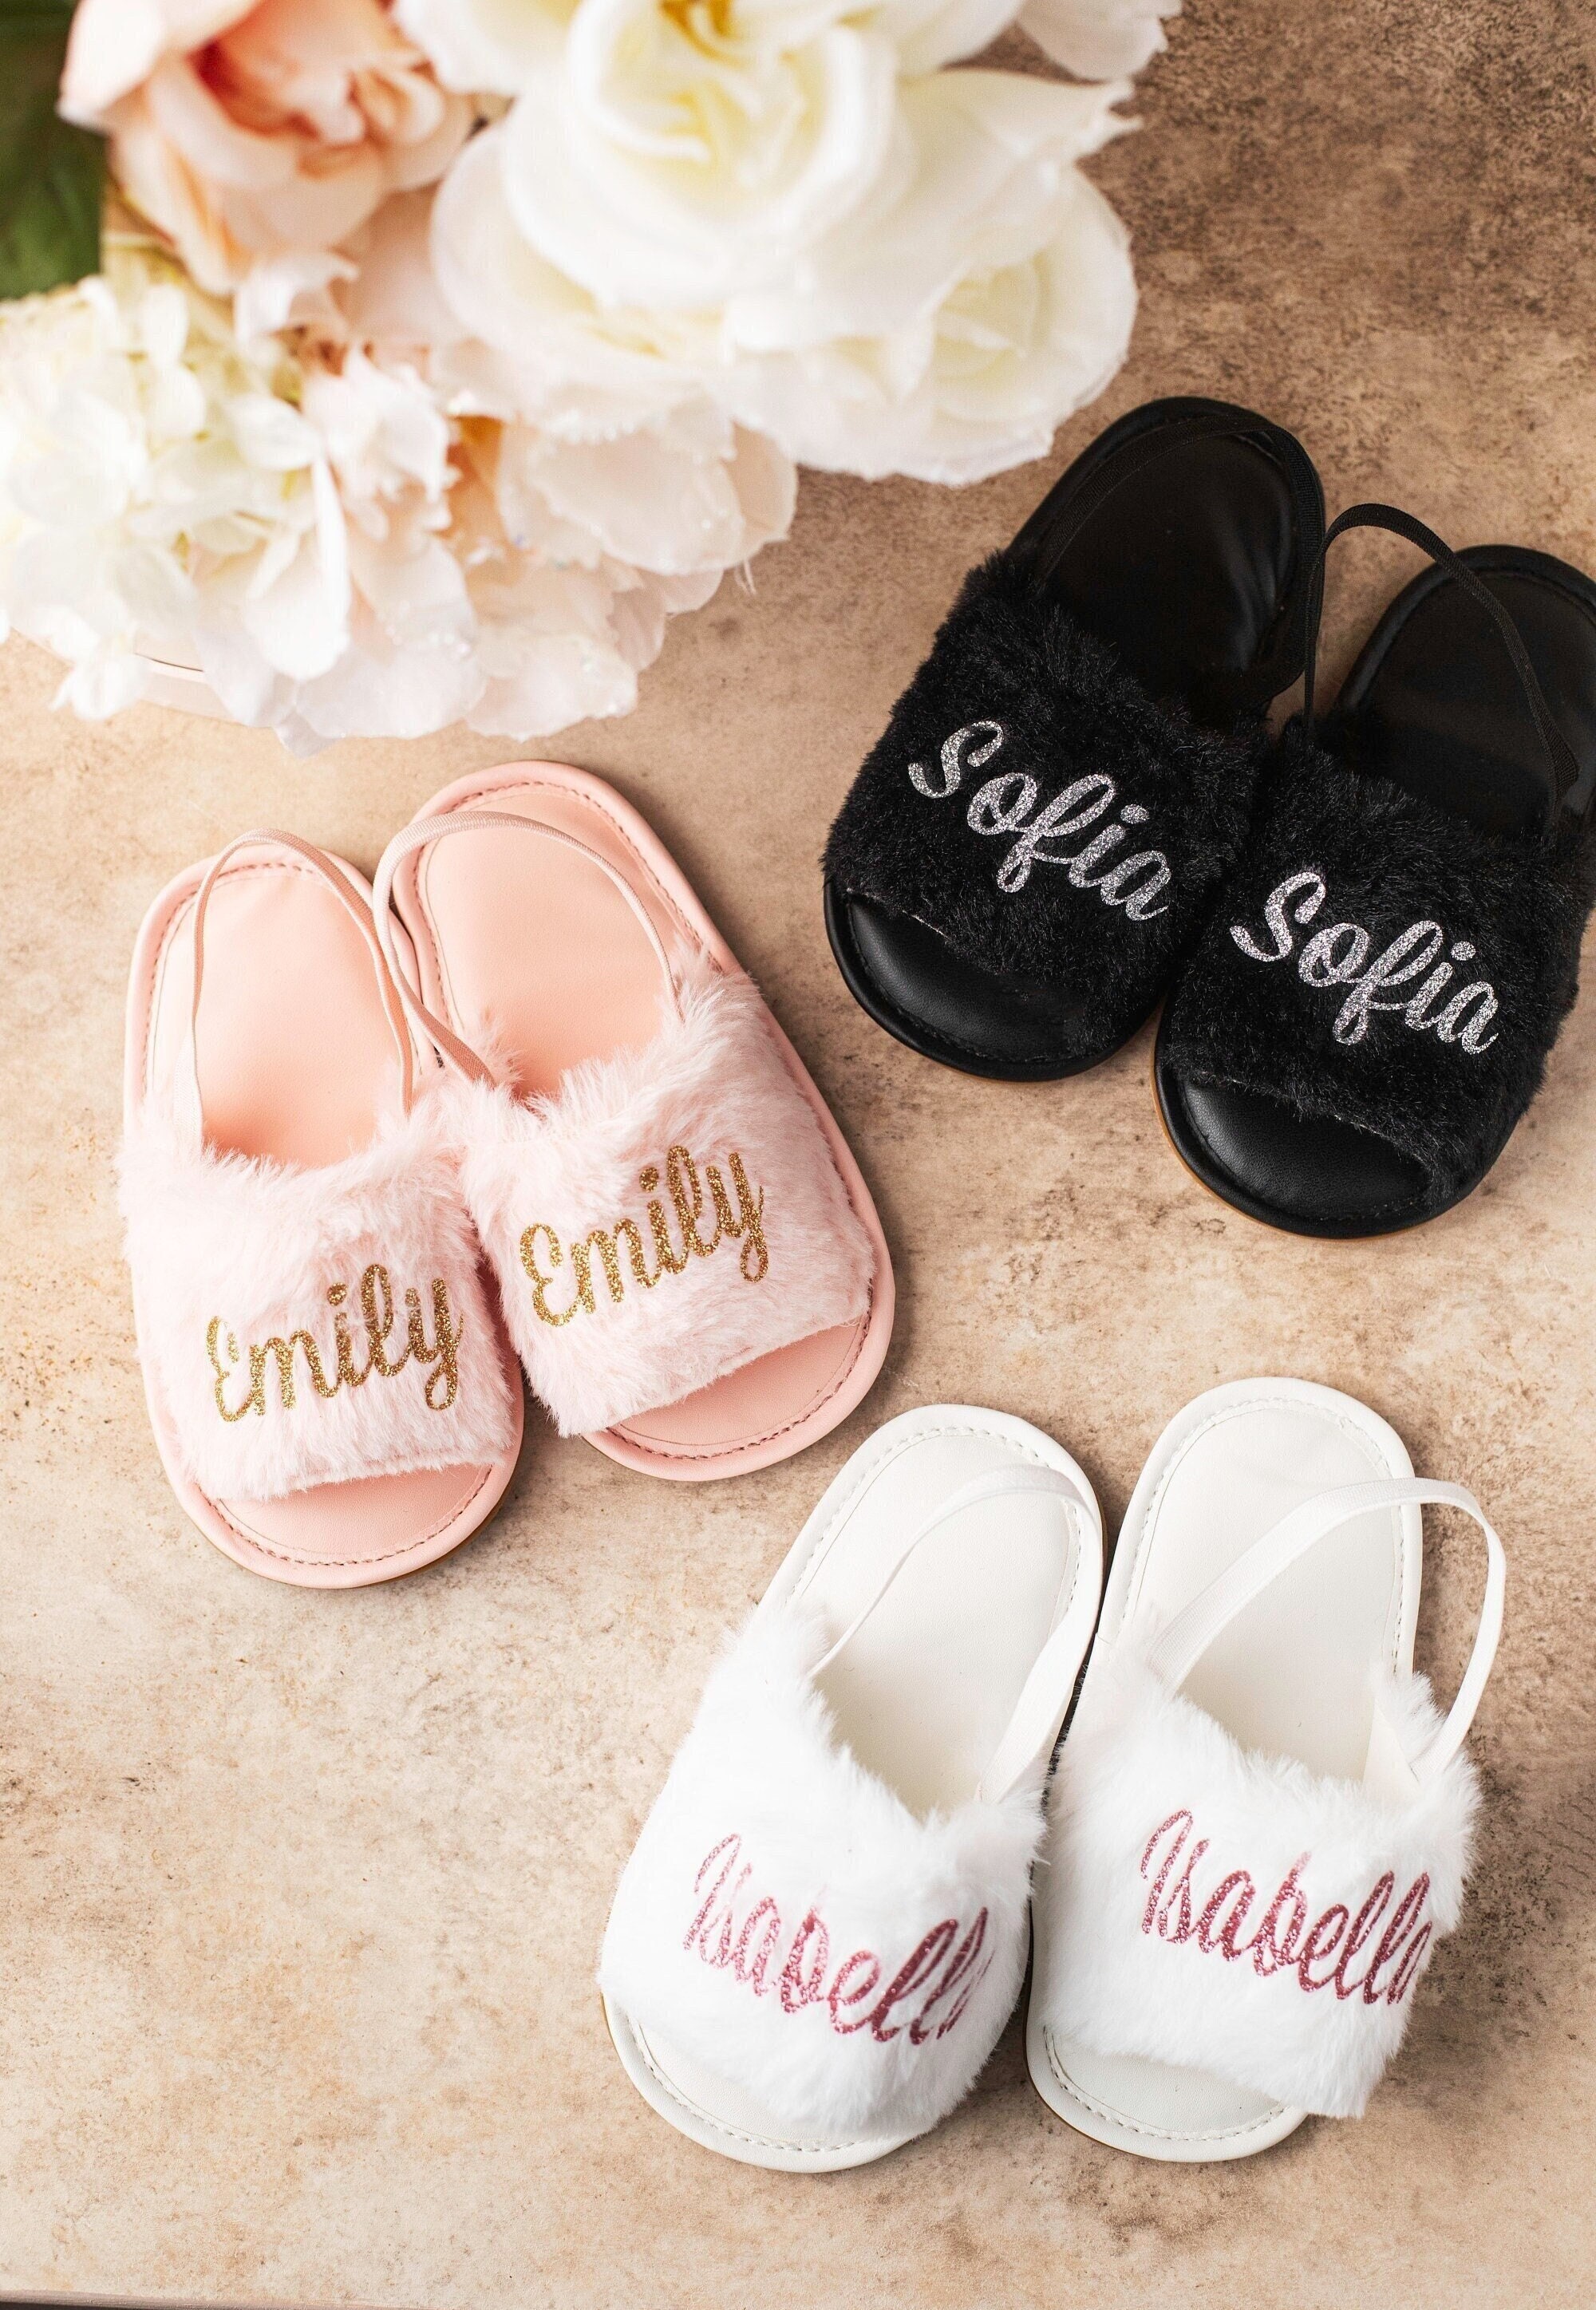 Shoes Girls Shoes Slippers personalized slippers custom slippers, Flower girl slippers Bridesmaid slippers Toddler slippers personalised spa slippers 